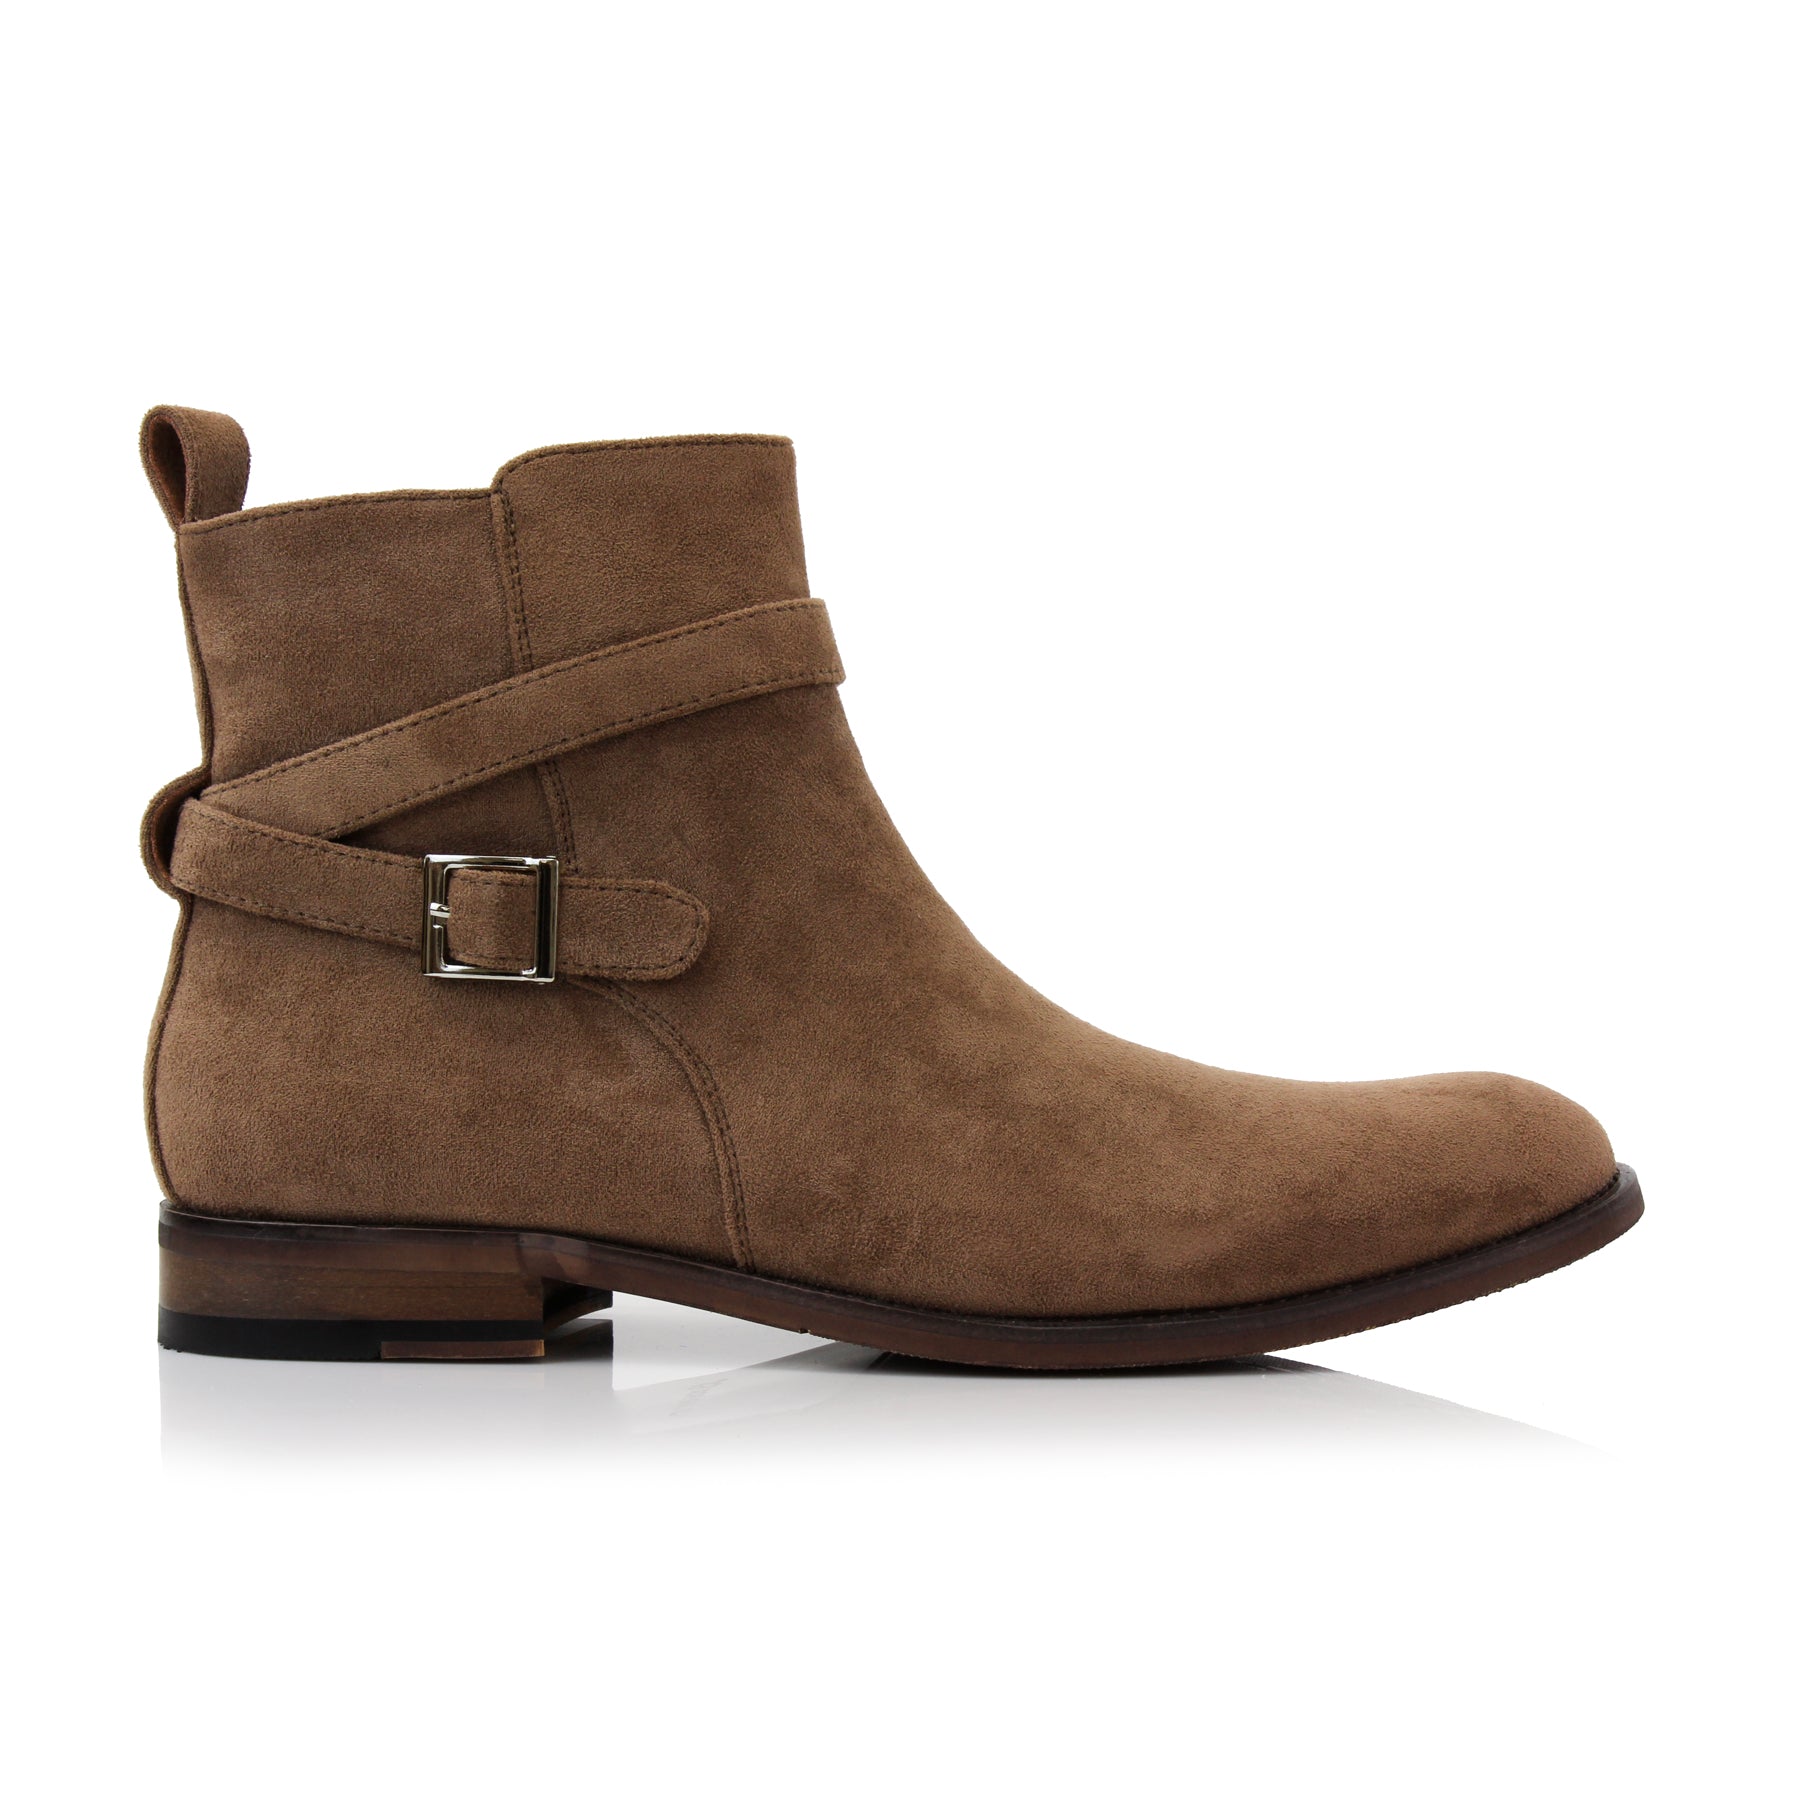 Strapped Suede Chelsea Boots | Derrick by Polar Fox | Conal Footwear | Outer Side Angle View